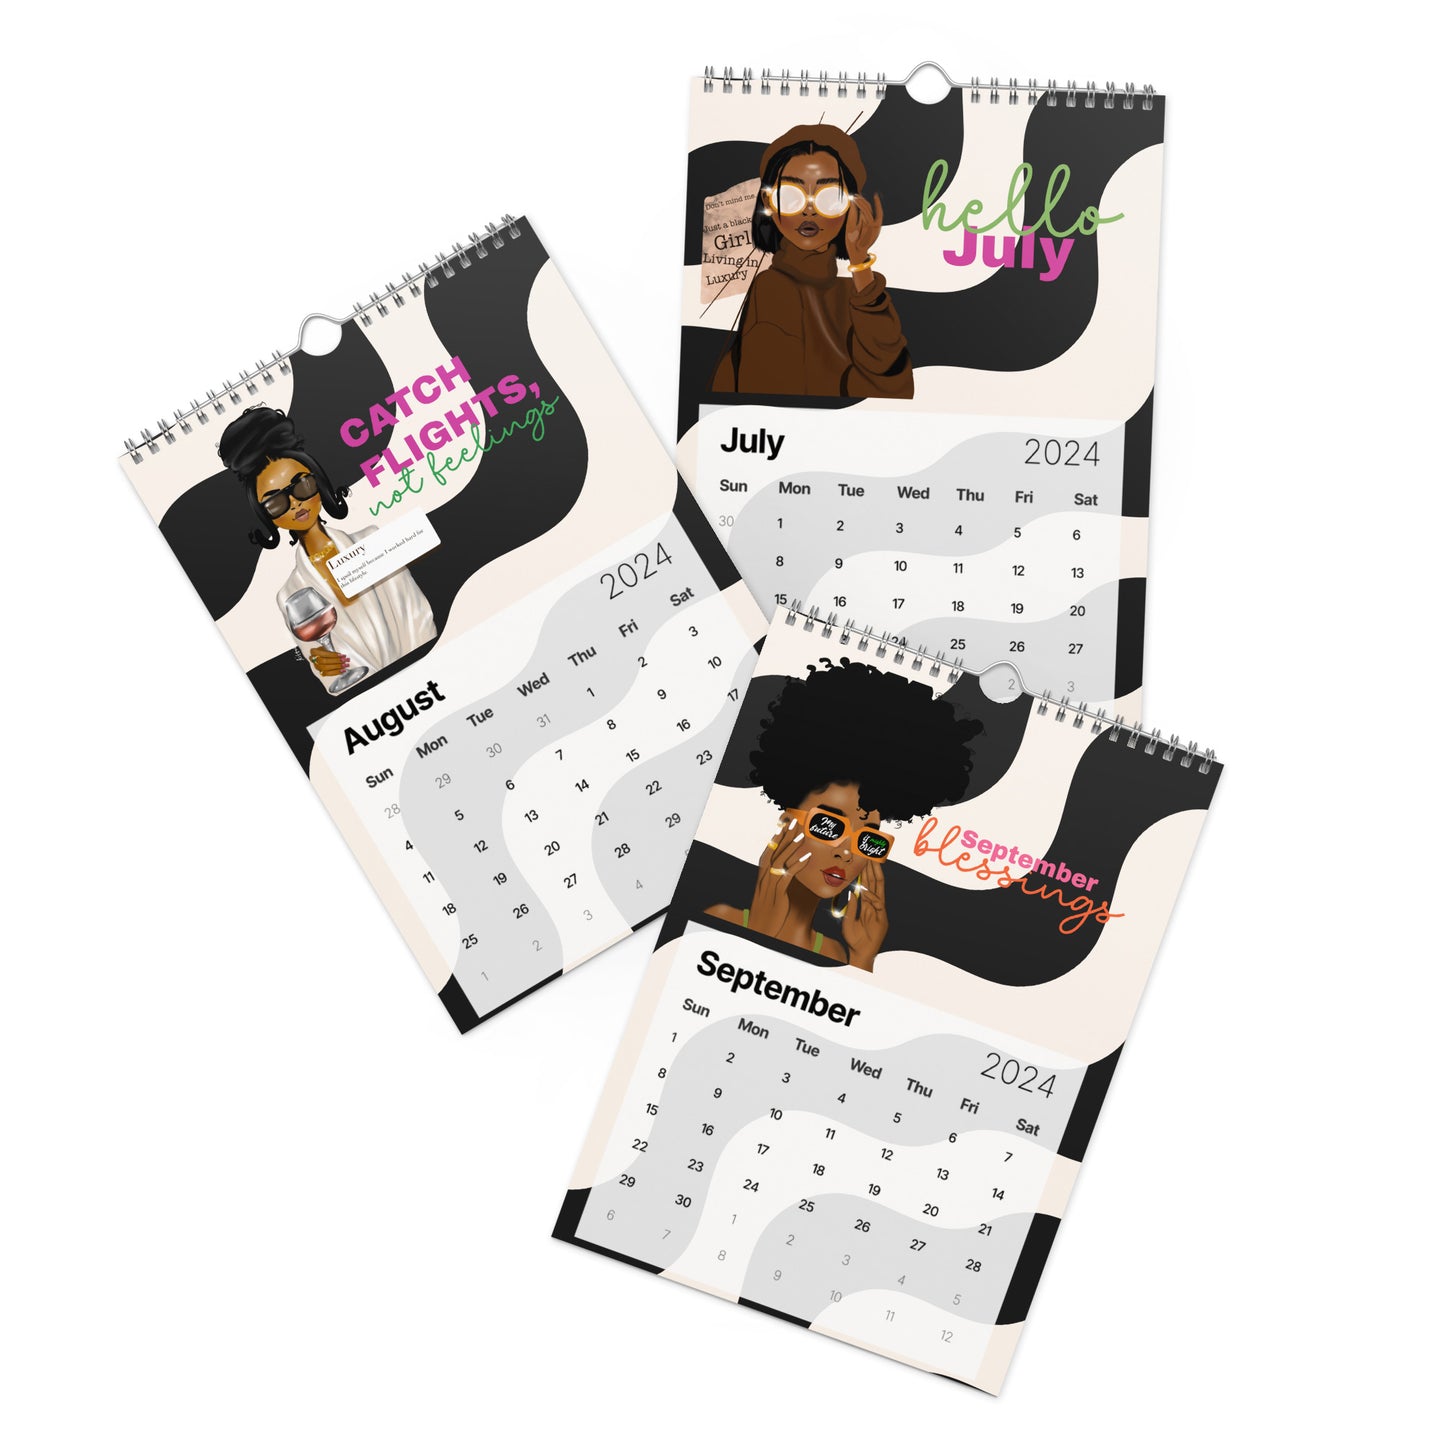  Introducing the 2024 12-Month Calendar: A celebration of strength, beauty, and positivity! Each month showcases vibrant black girl art paired with empowering affirmations. 🎨💖 Dive into a year of inspiration and self-love.